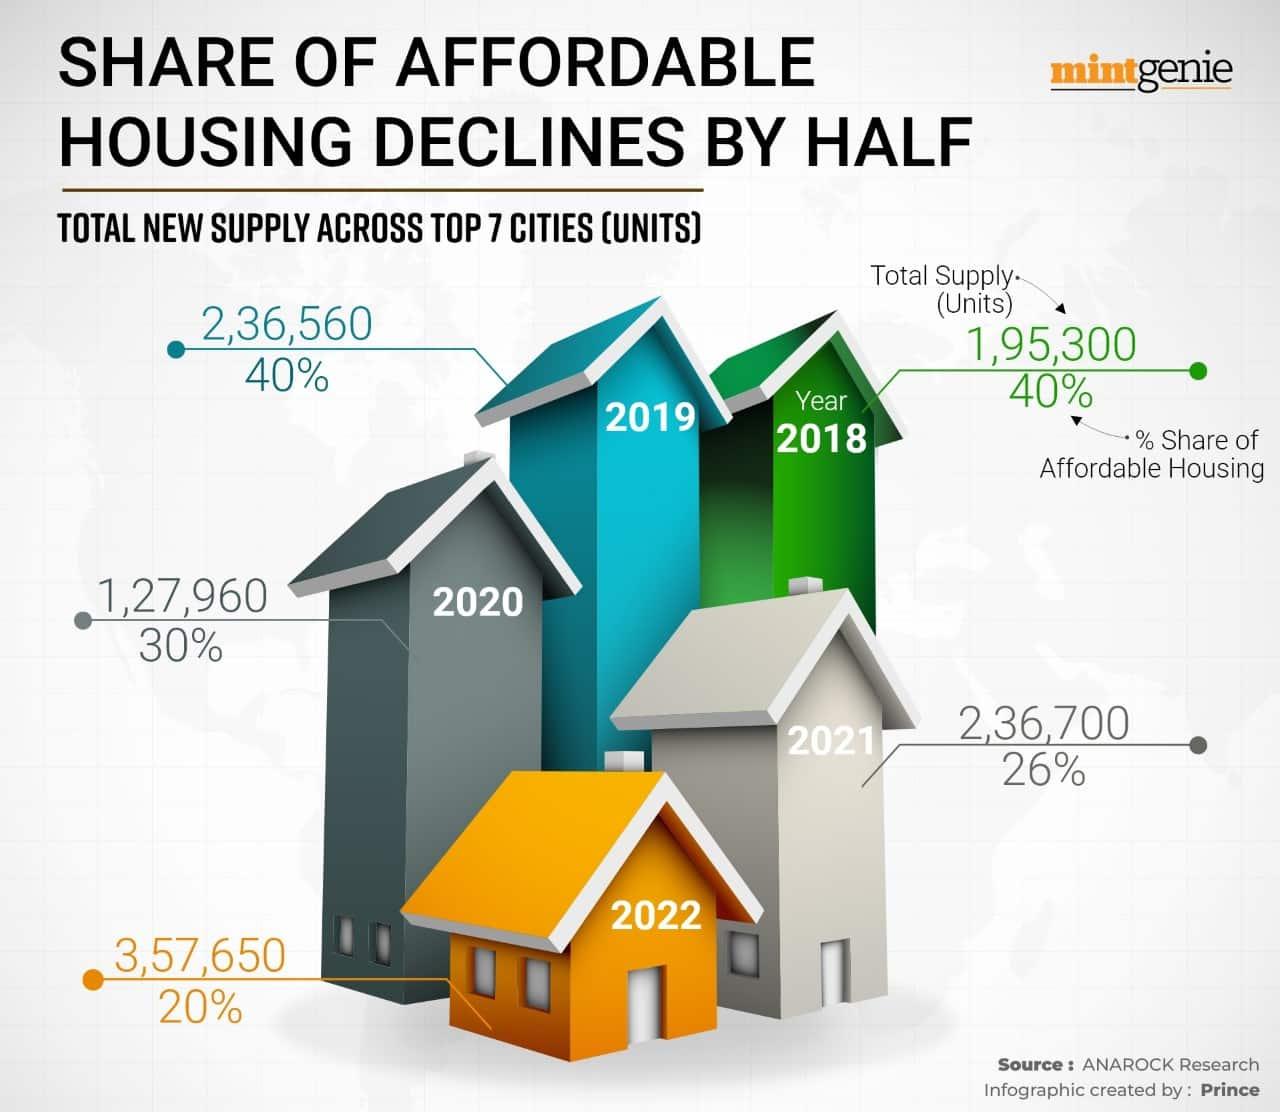 Share of affordable housing declines by half. 
